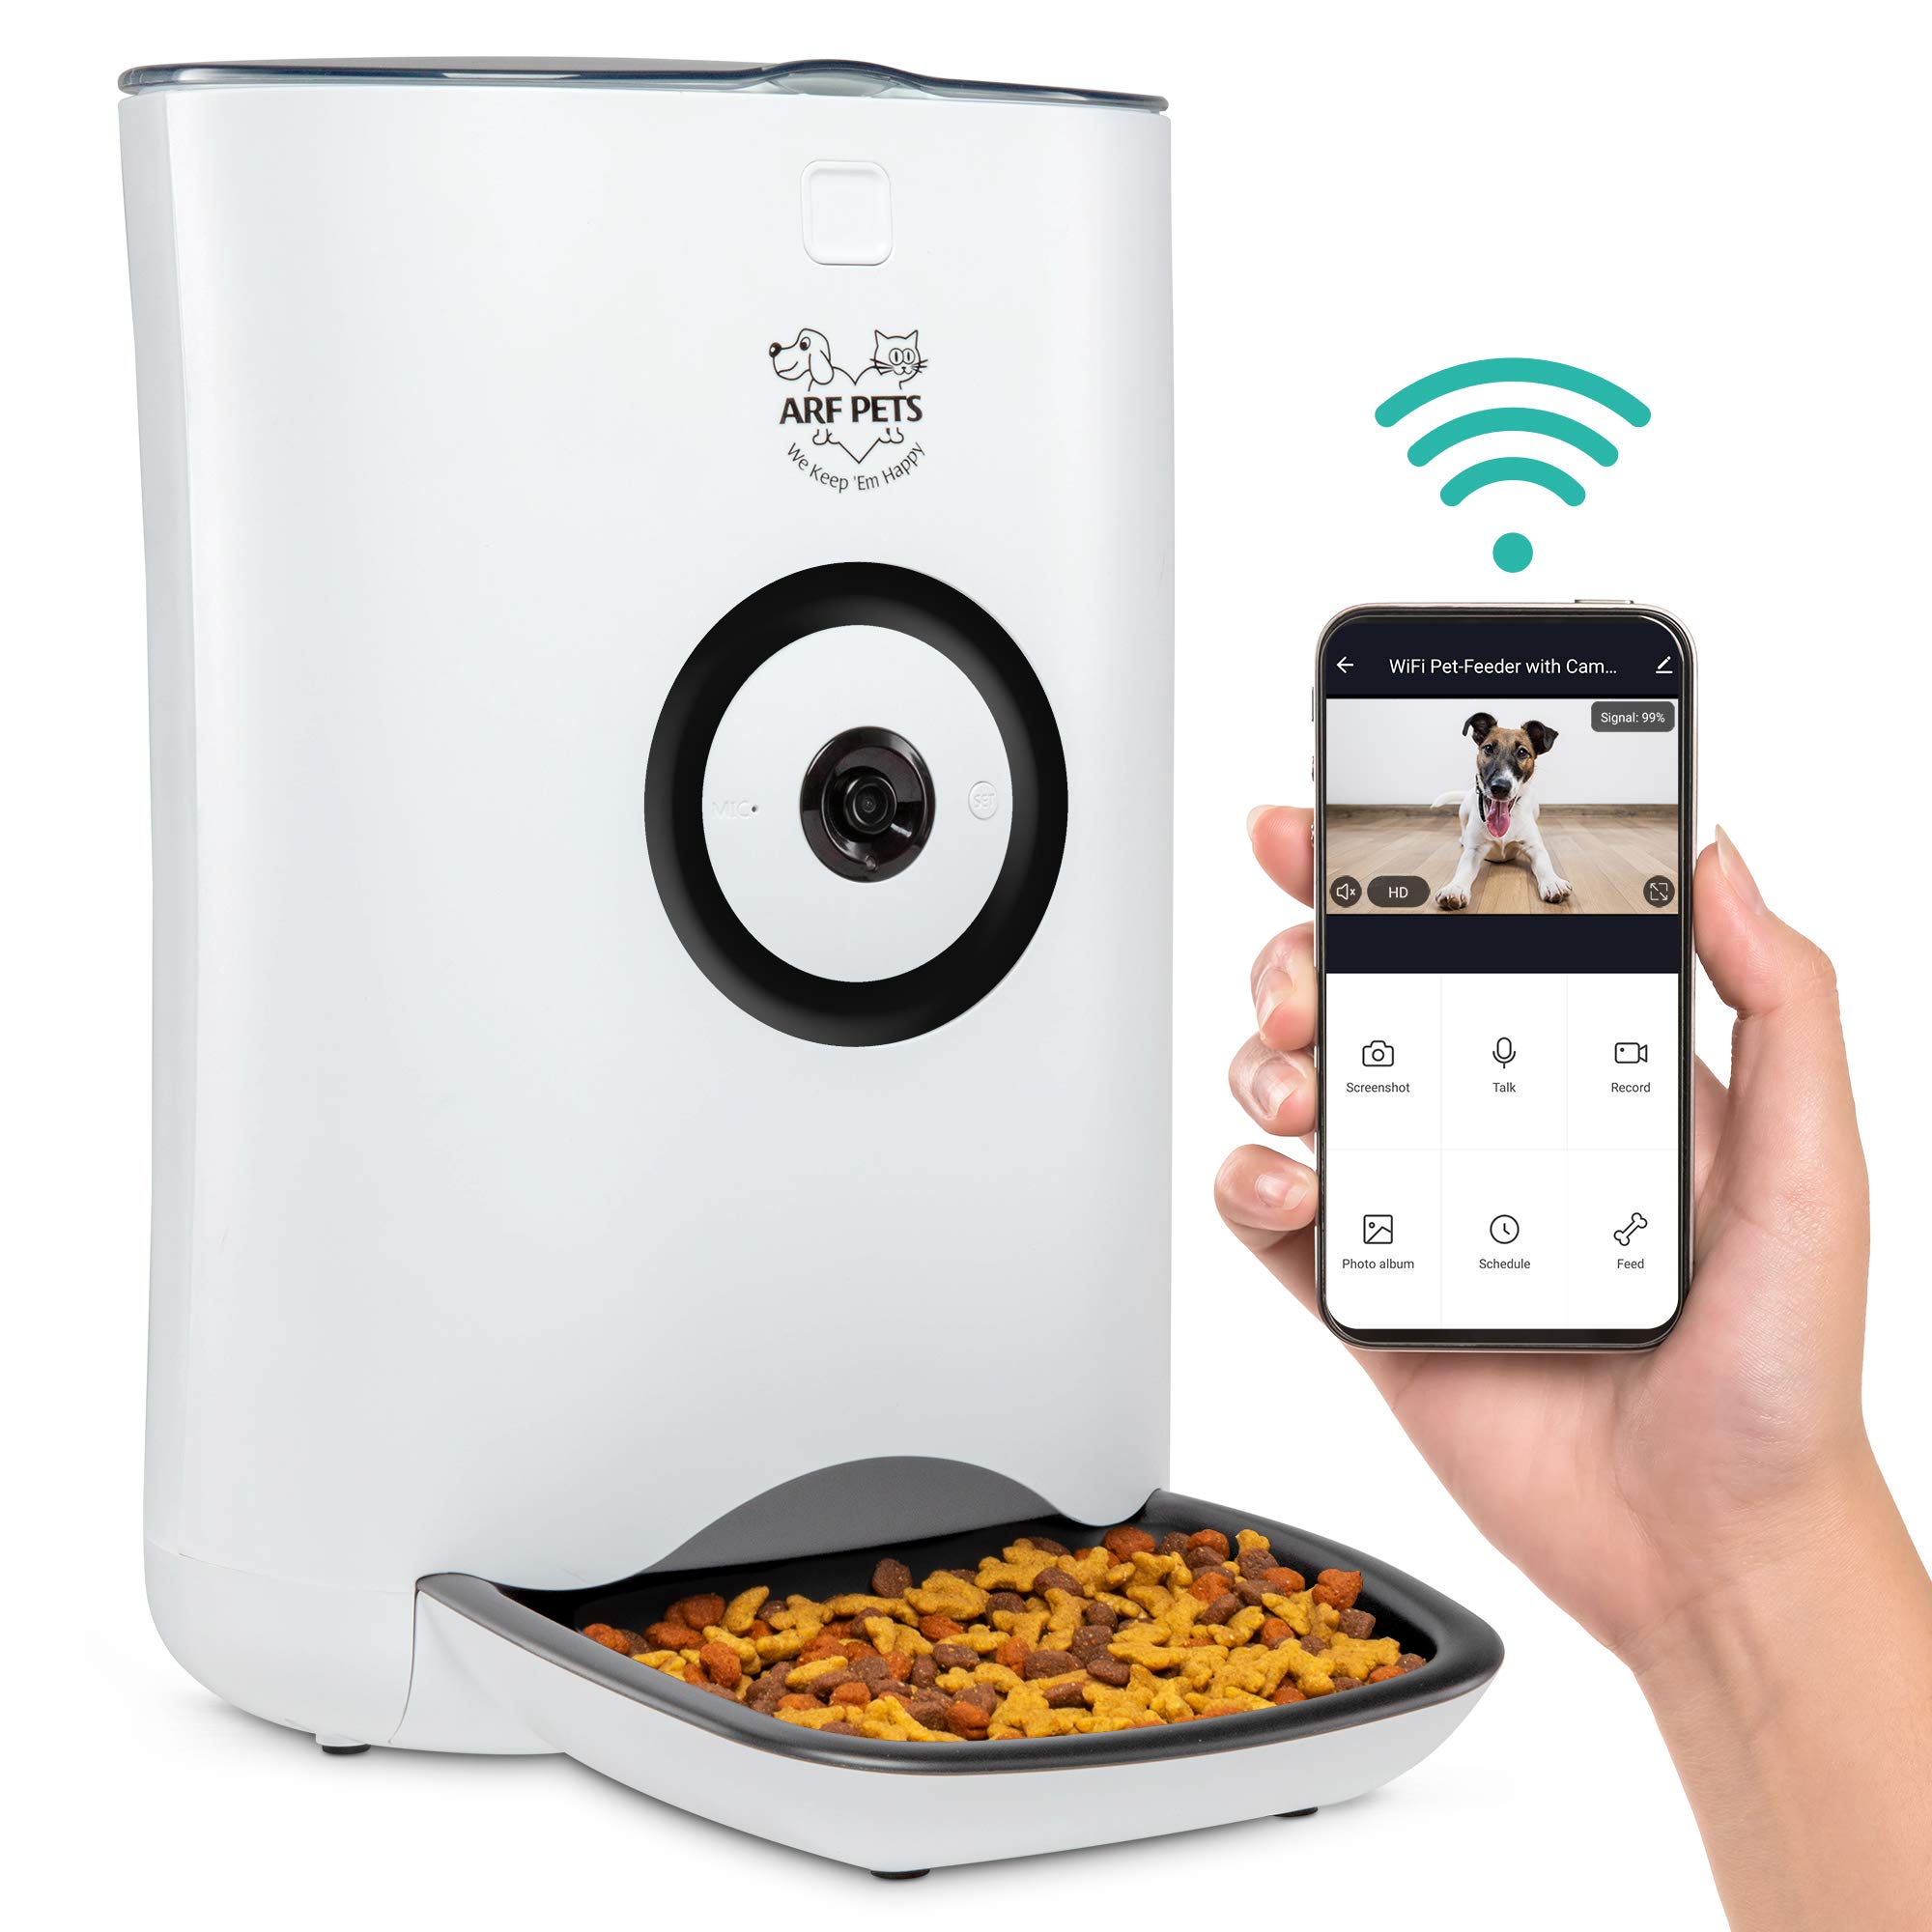 Arf Pets Smart Automatic Pet Feeder with Wi-Fi, App-Control